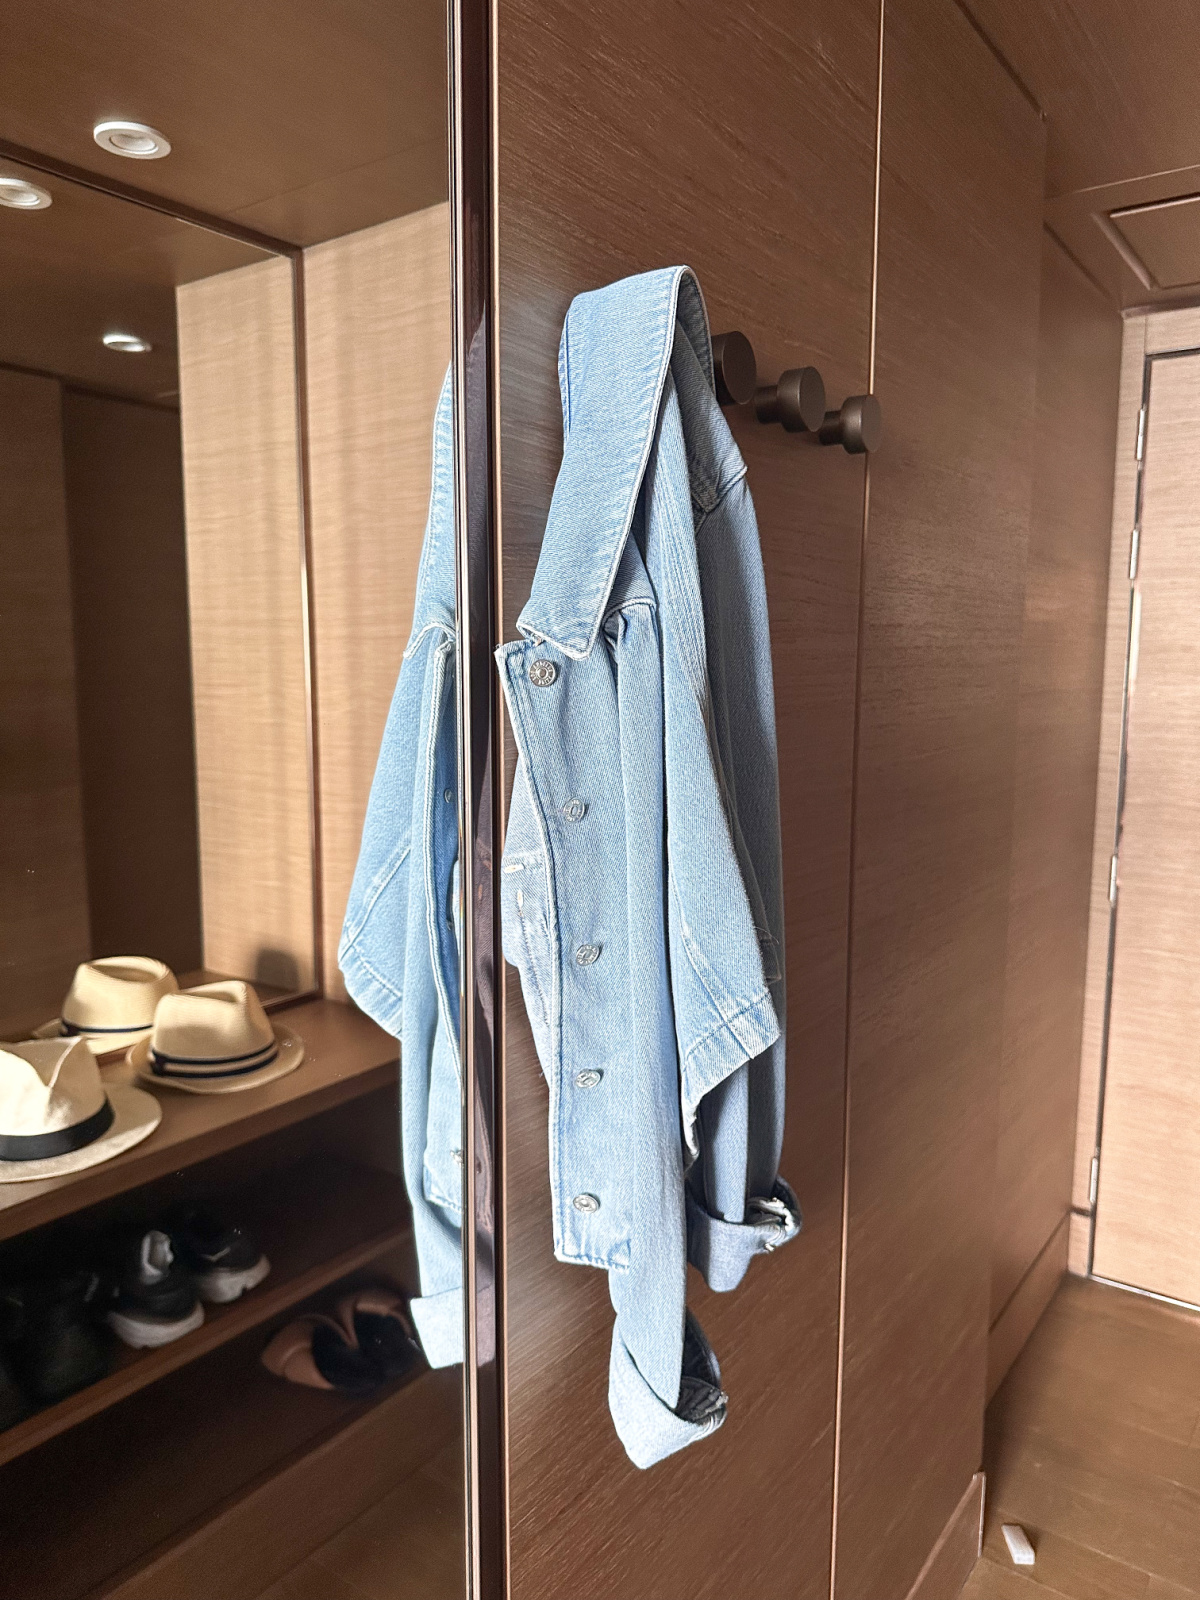 Denim jacket hanging on took in entryway to cruise ship cabin.